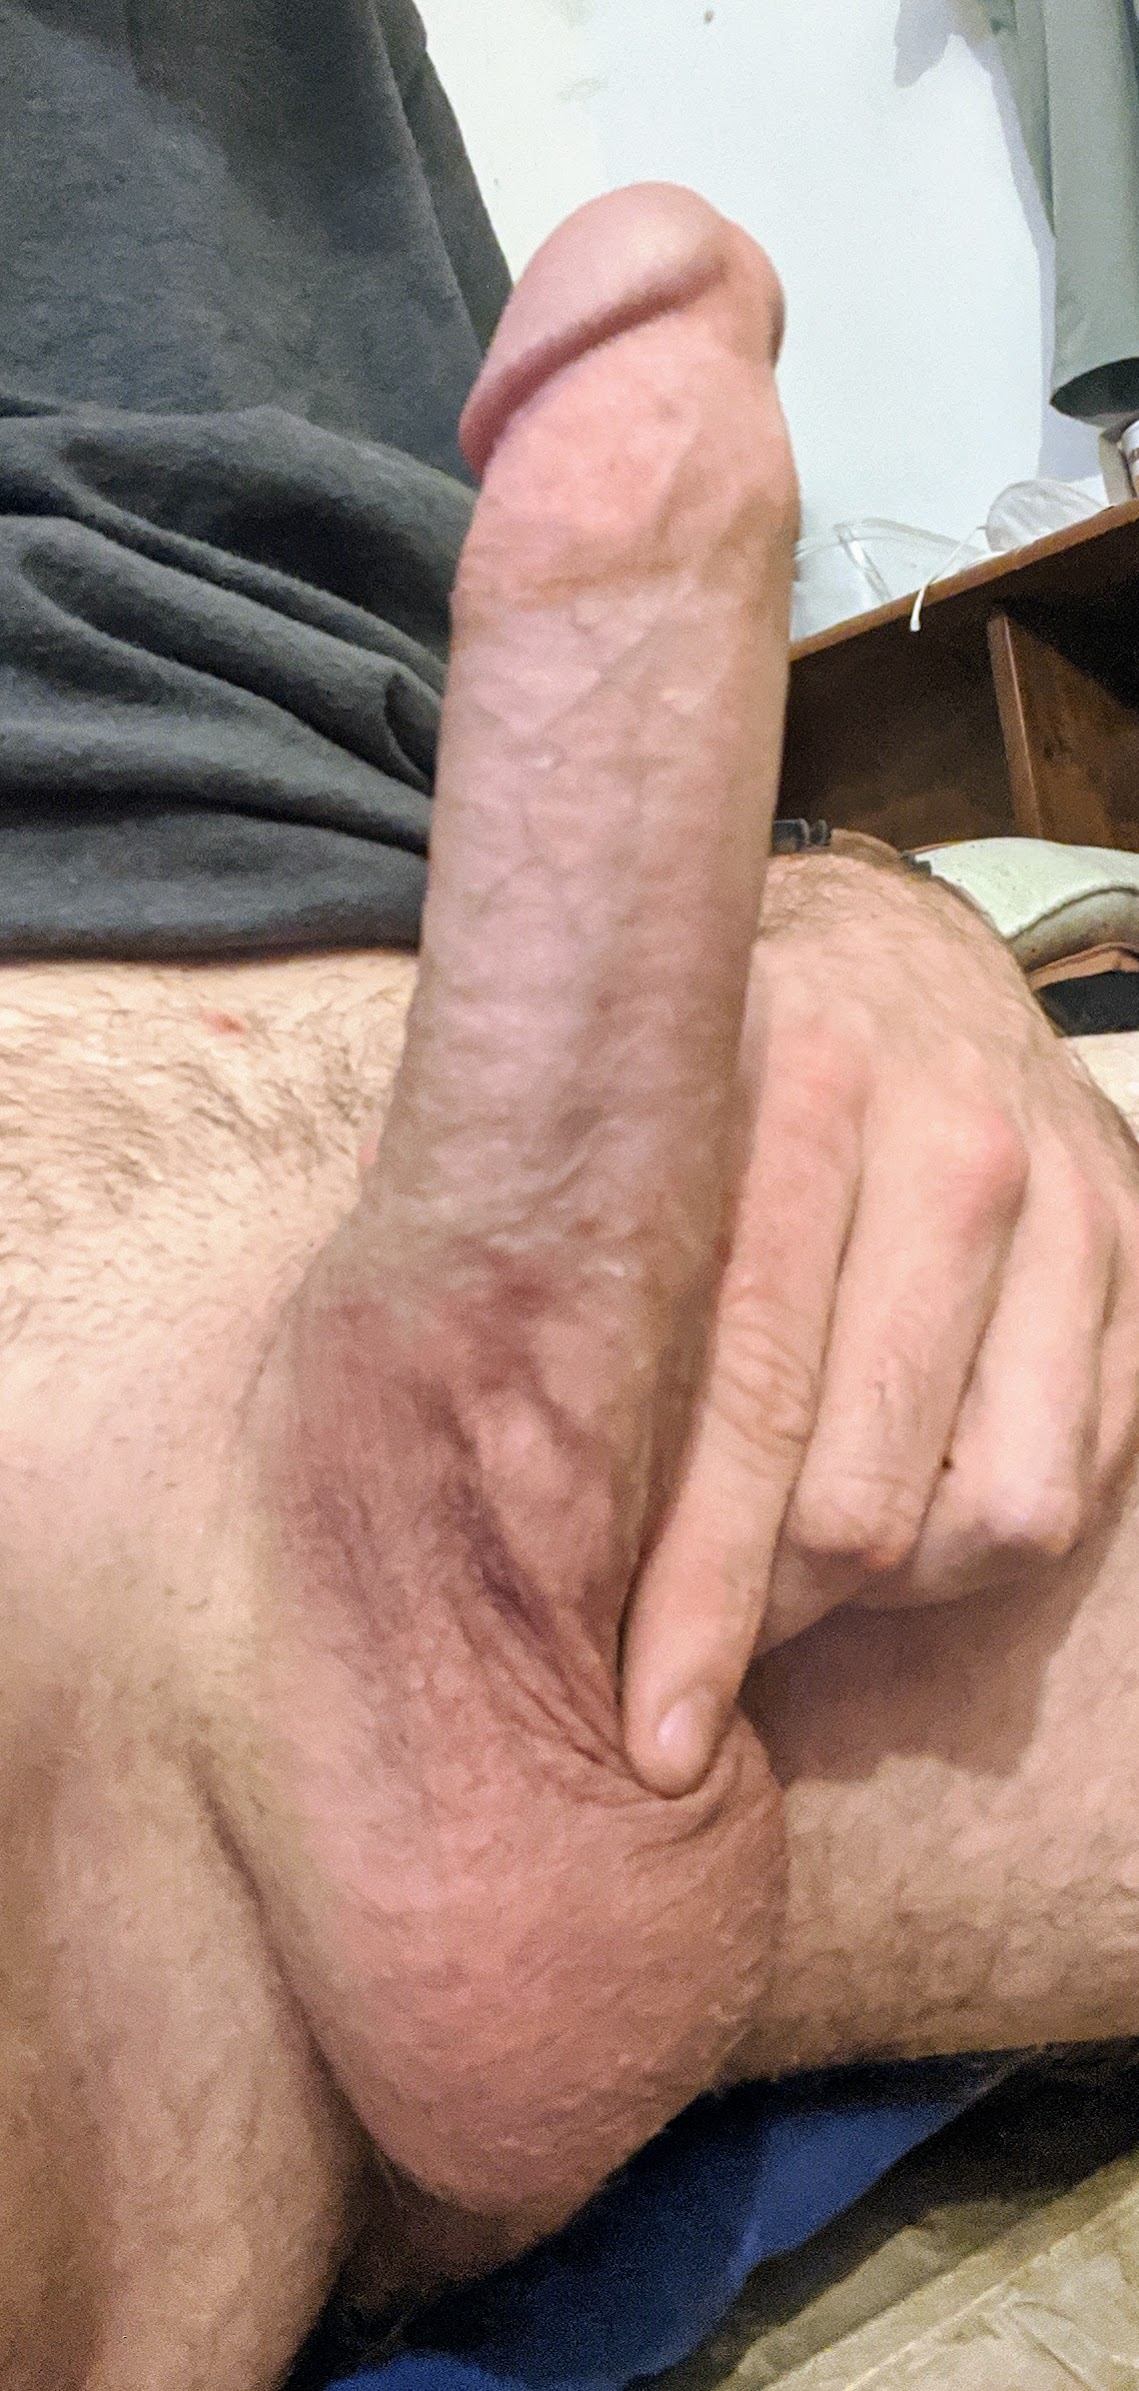 My wife's pussy and my dick